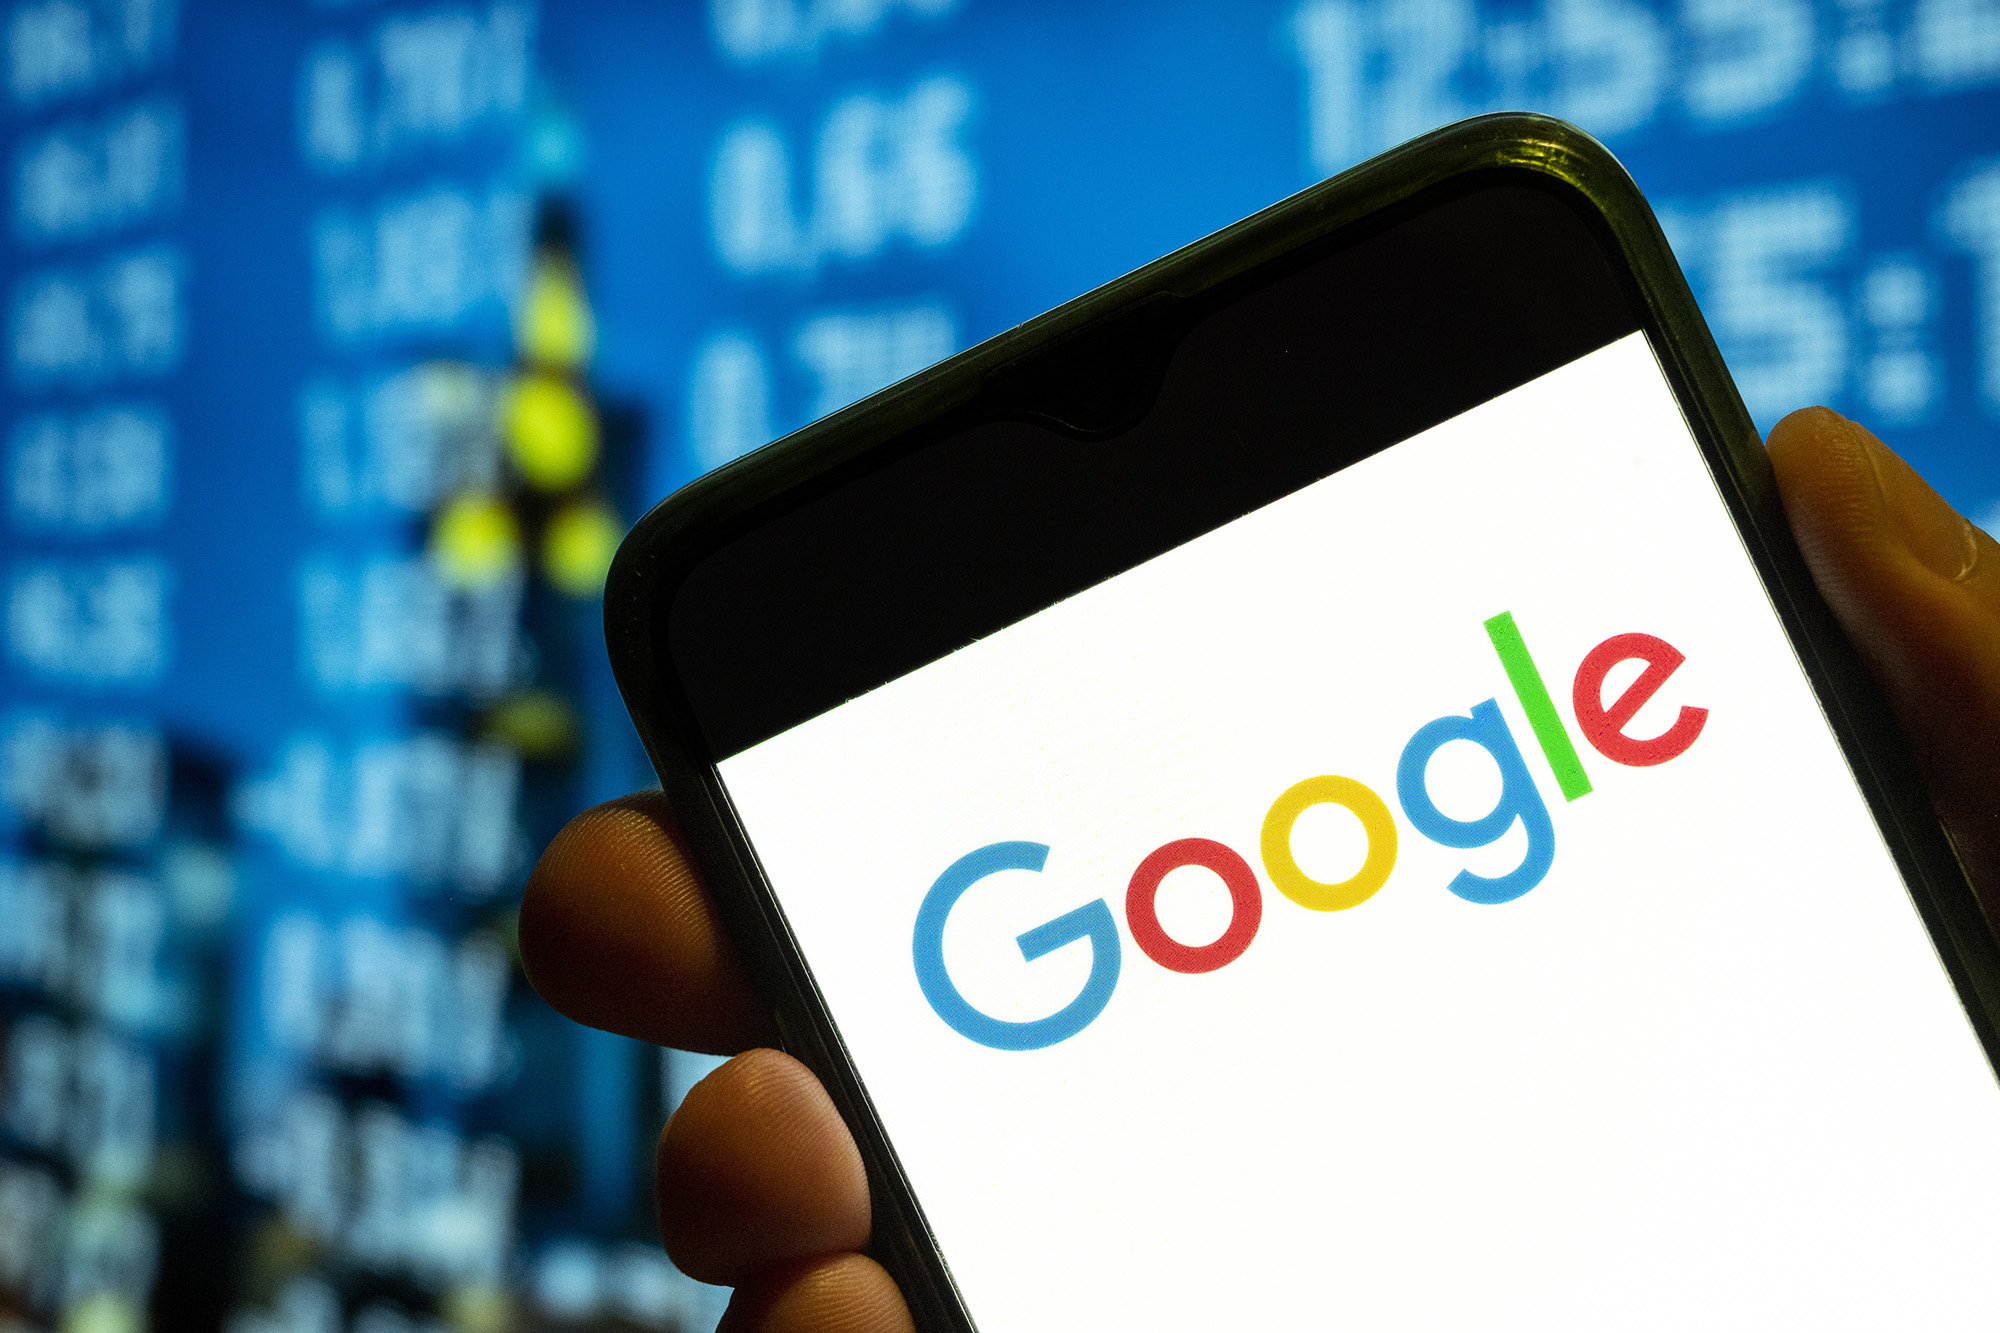 A San Francisco man had his Google account shut down after he used his Android smartphone to send photos of his son's swollen genitals to his doctor, according to a report.